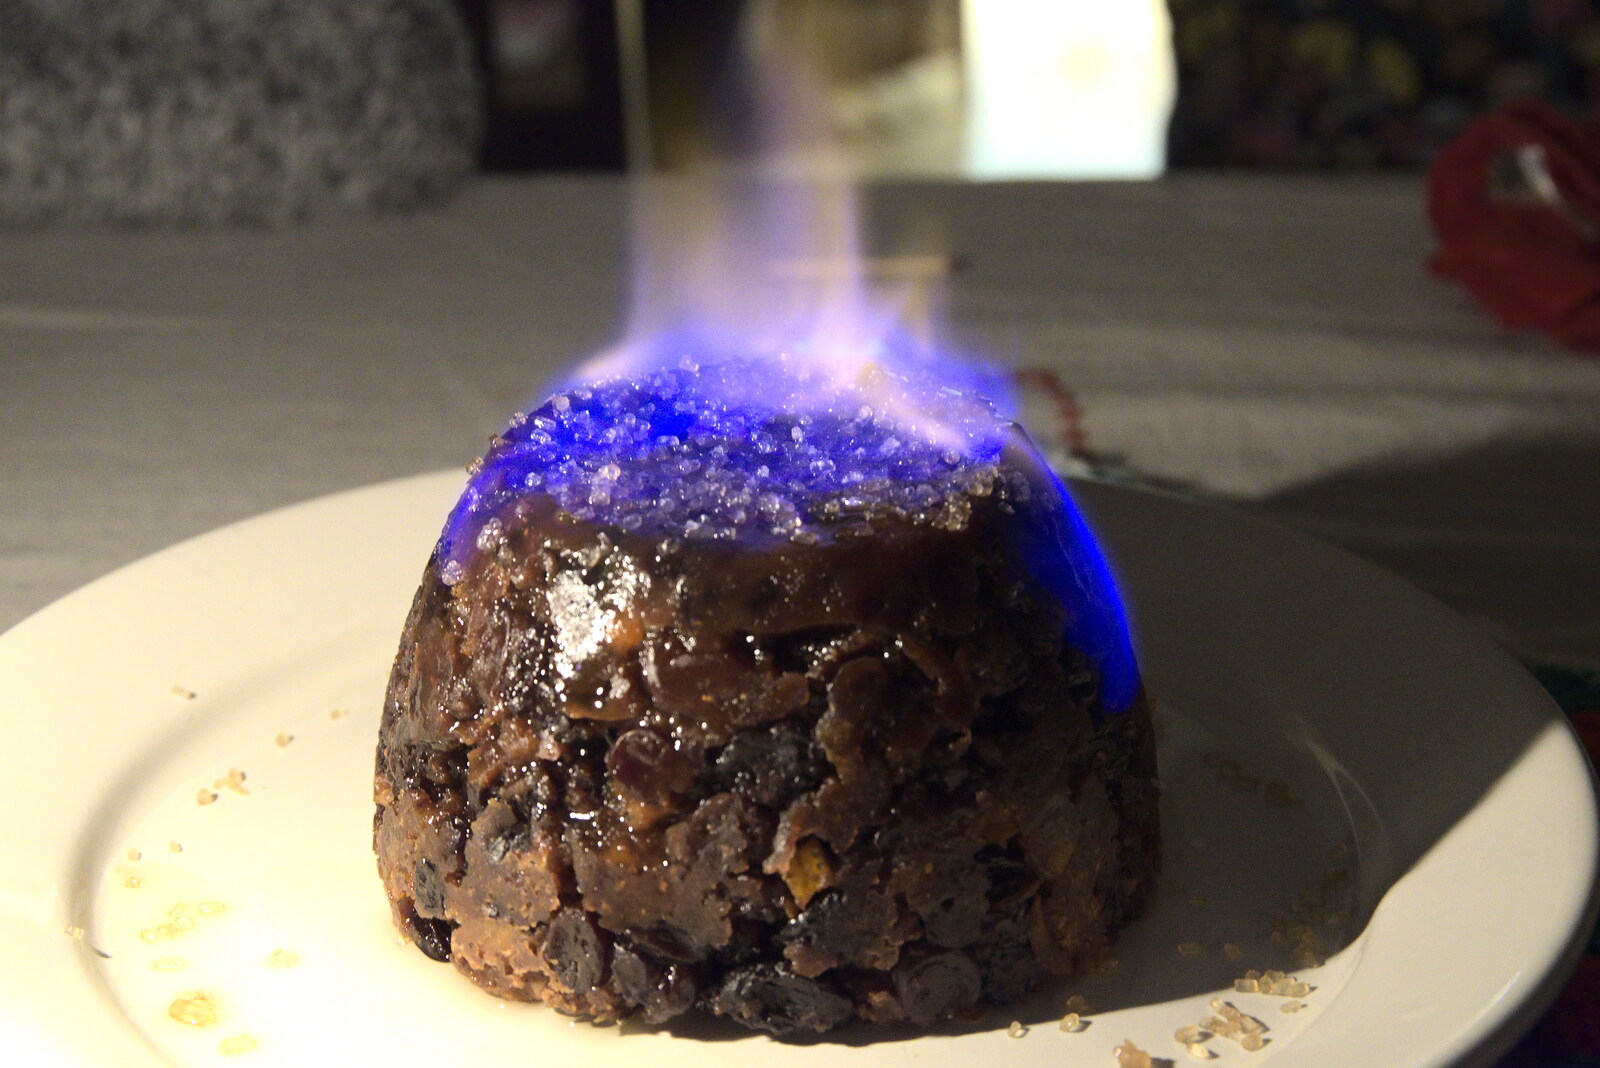 We set fire to the Christmas pudding  from A Few Hours at the Seaside, Southwold, Suffolk - 27th December 2021